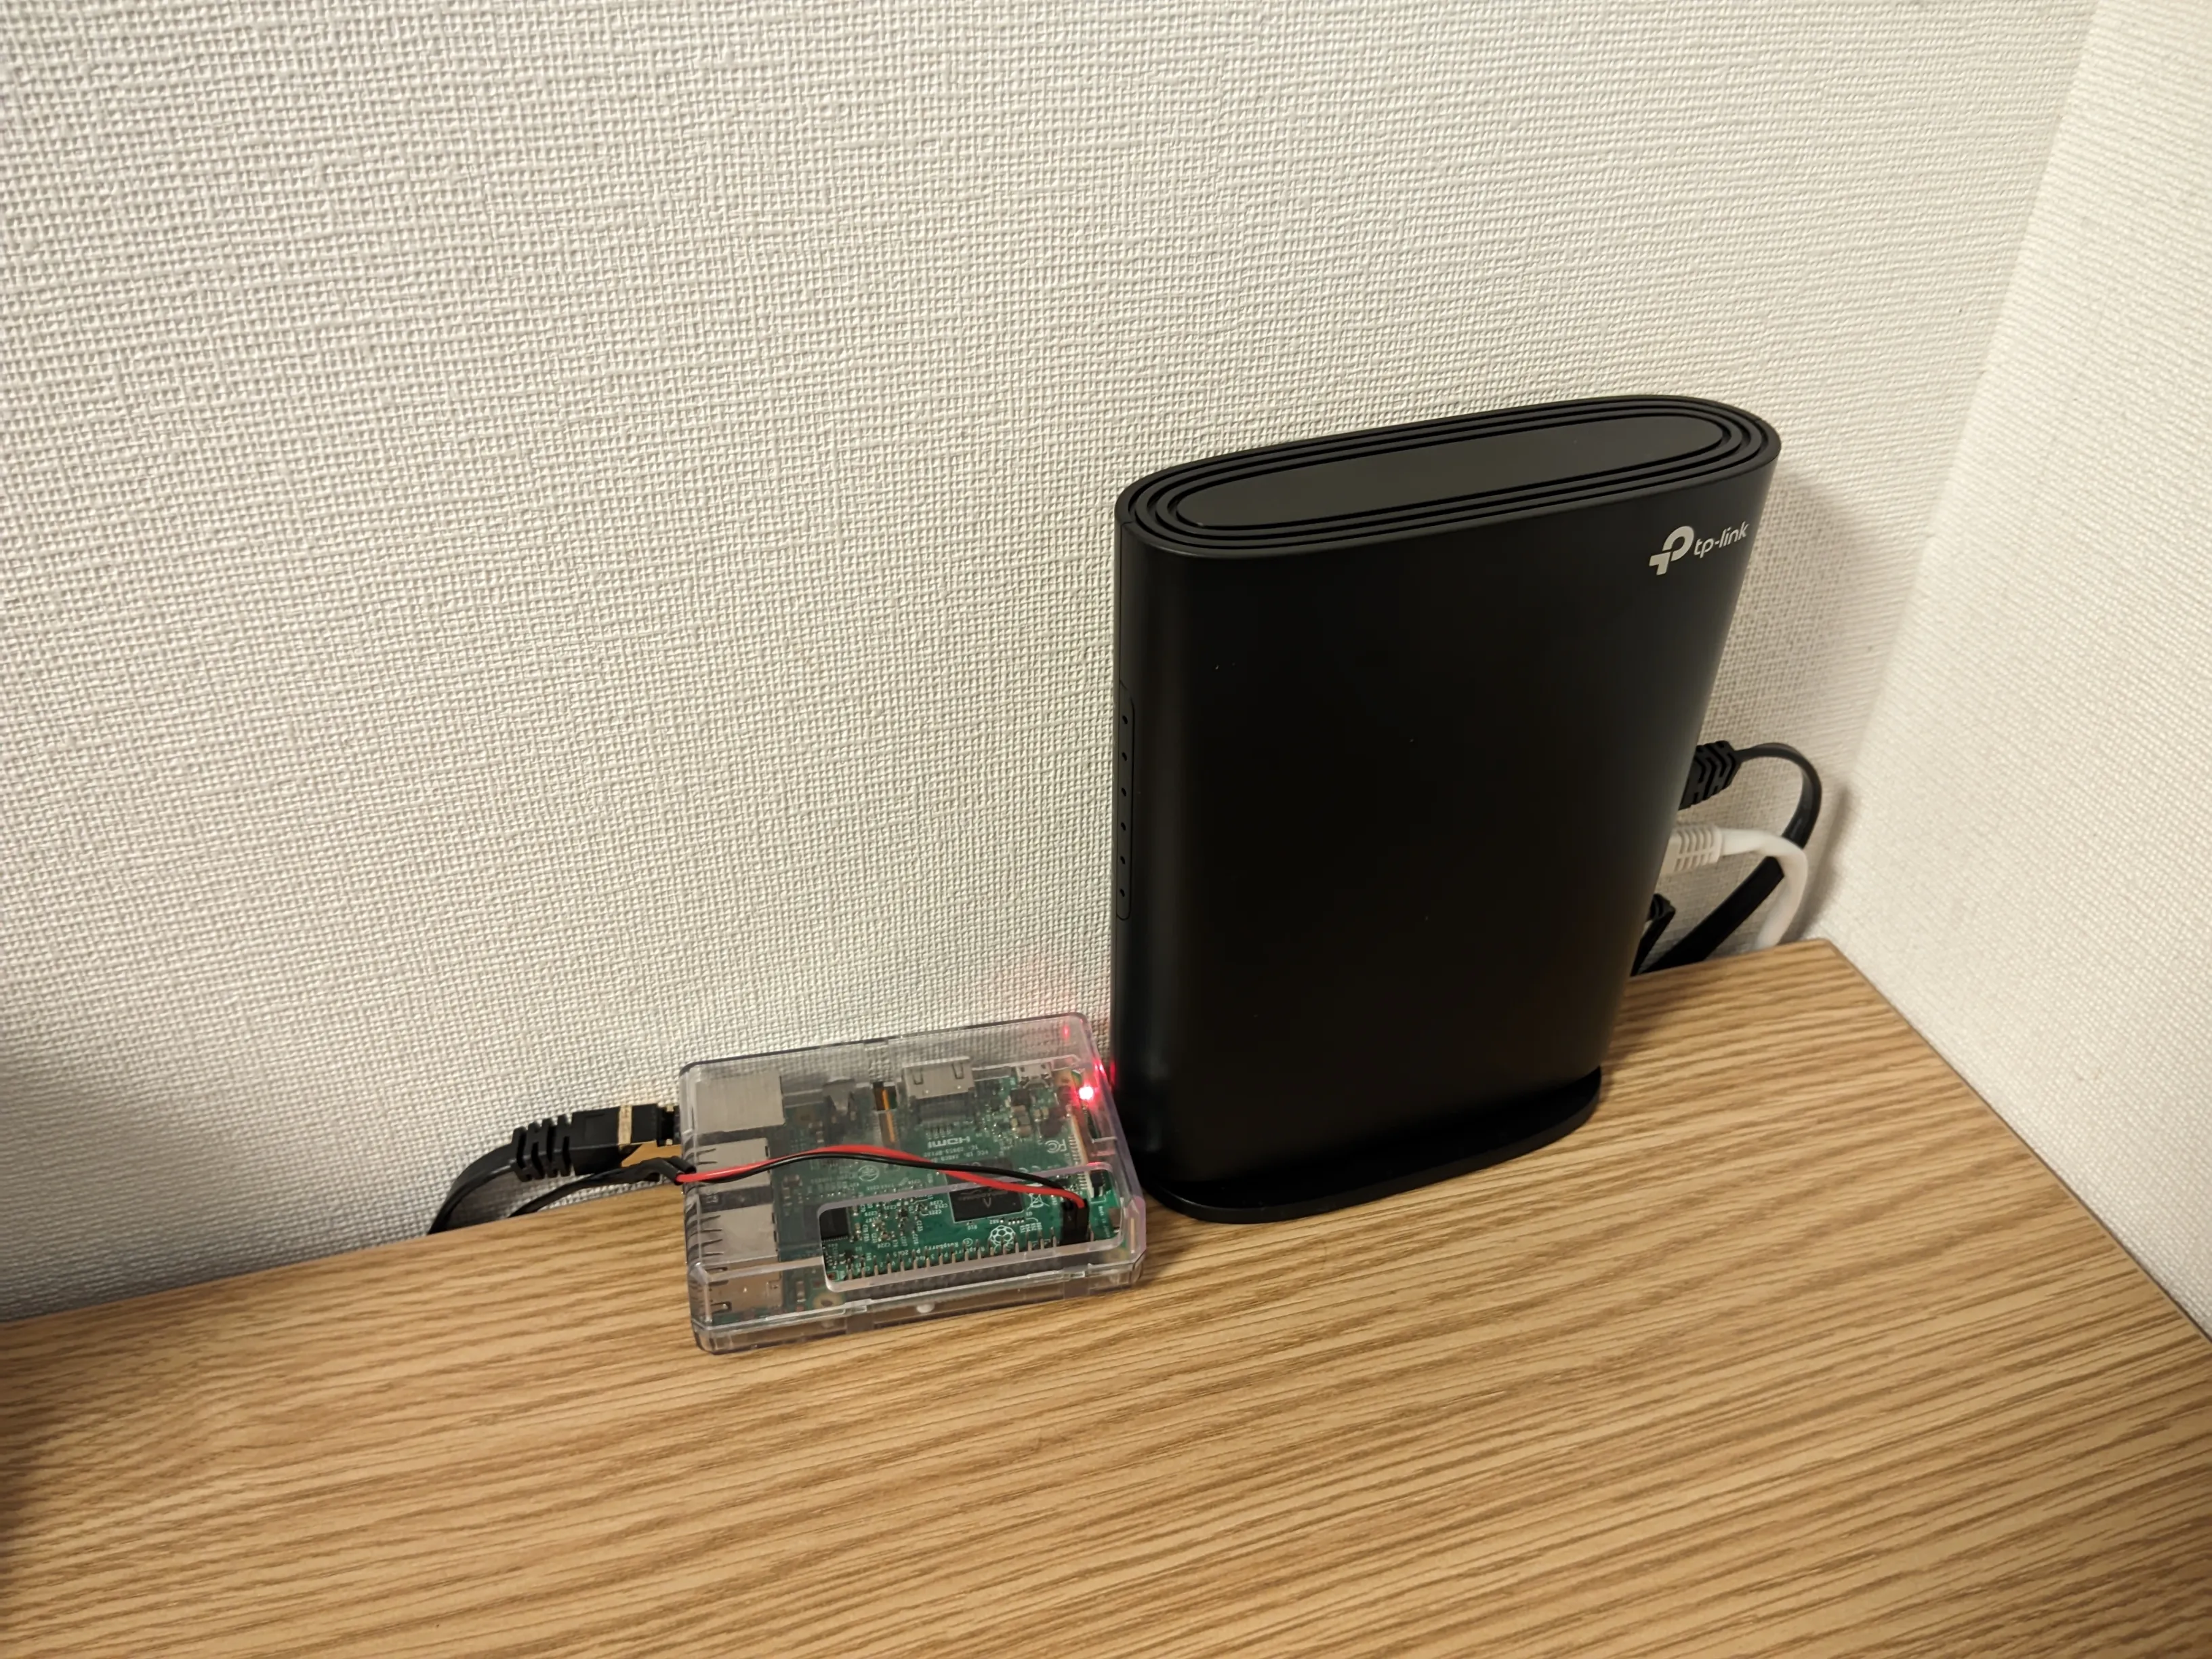 rpi and router